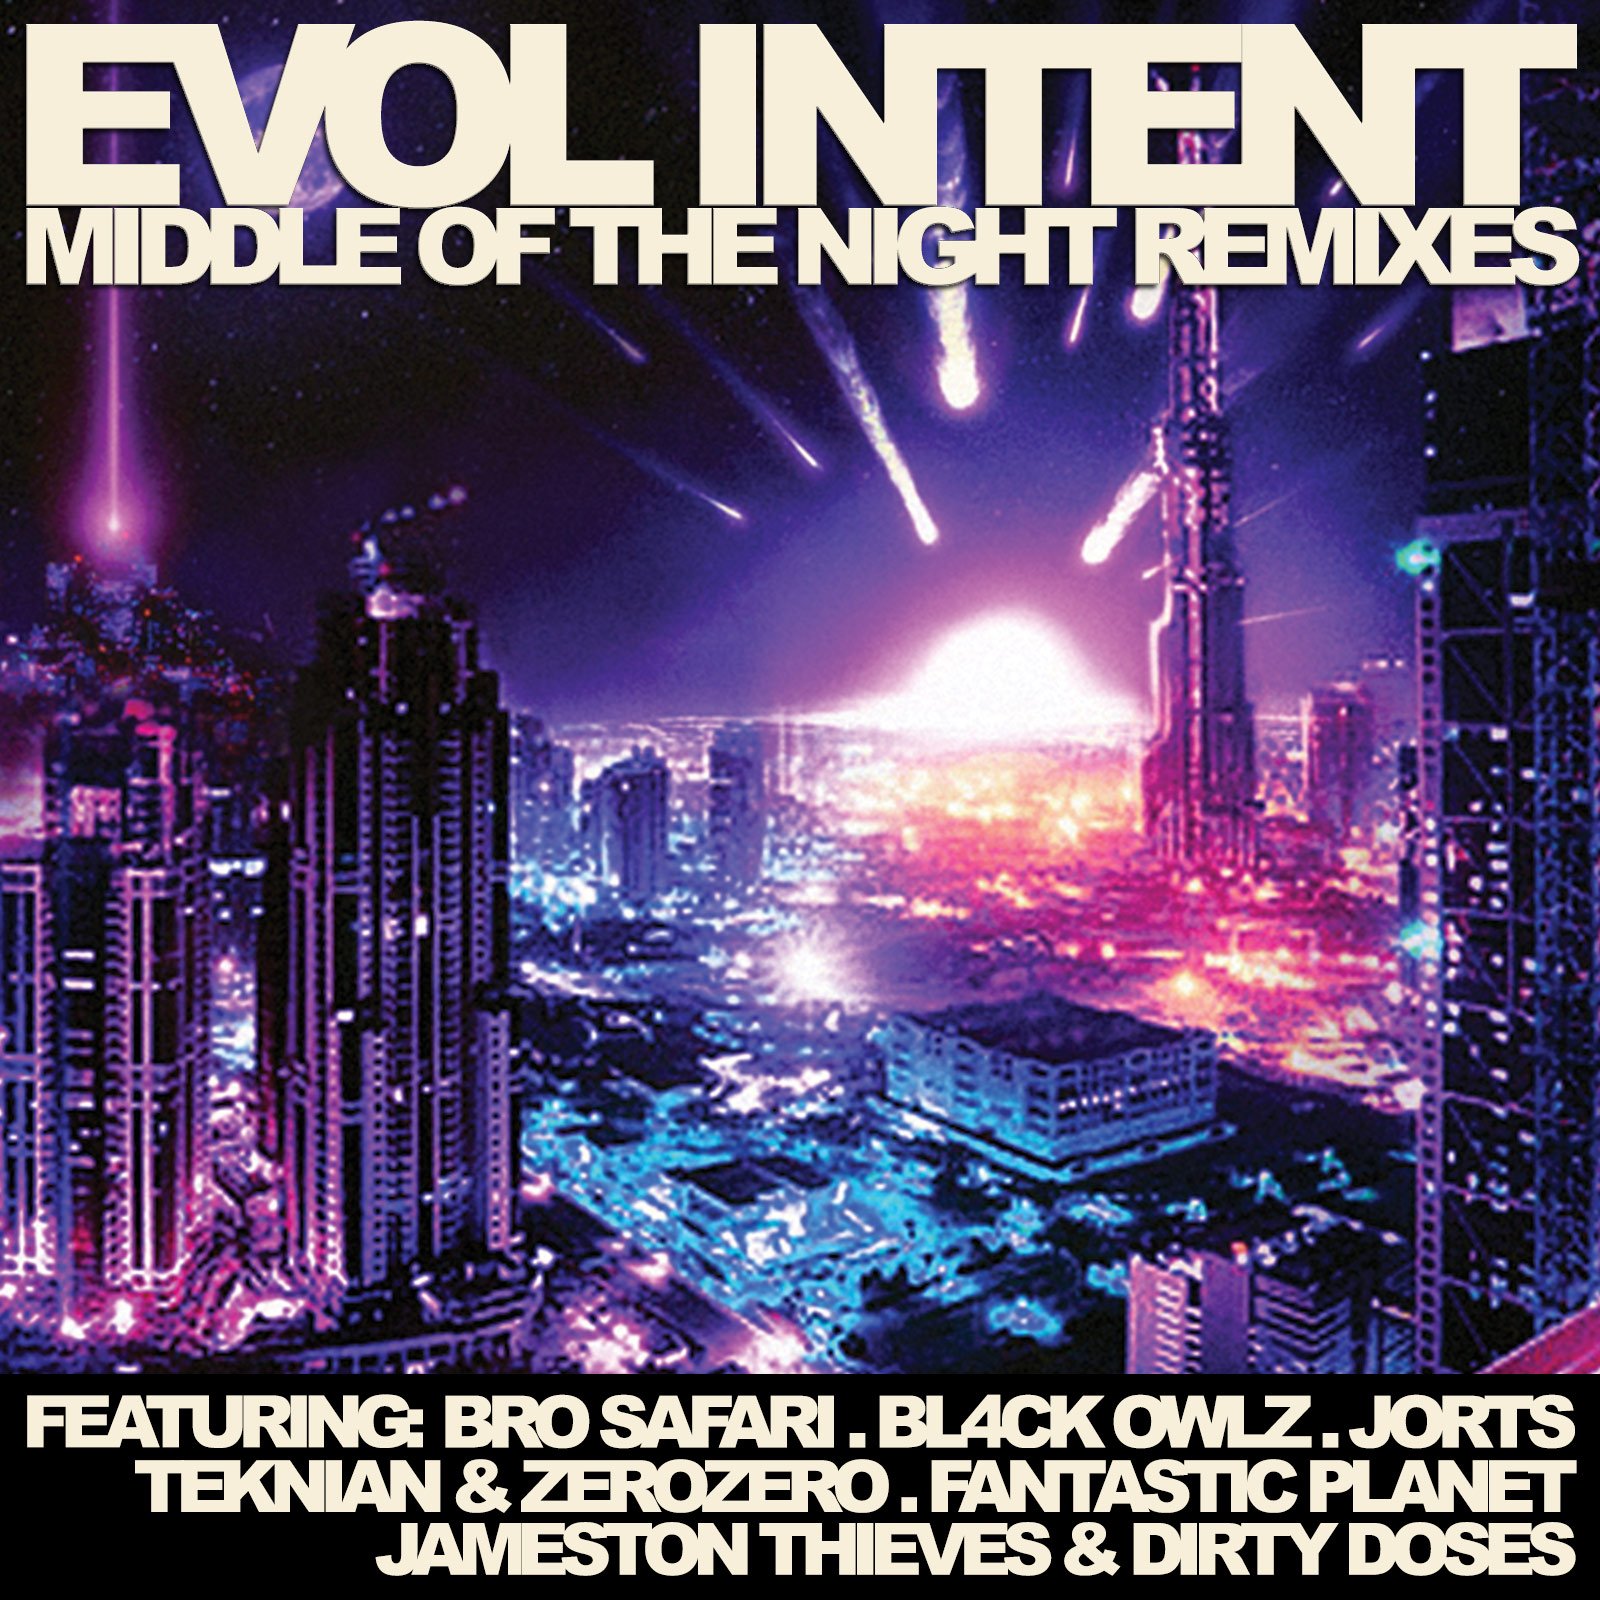 Middle of the night mp3. Evol Intent. Middle of the Night. Middle of the Night - Evol Intent. Middle Fo the Night.